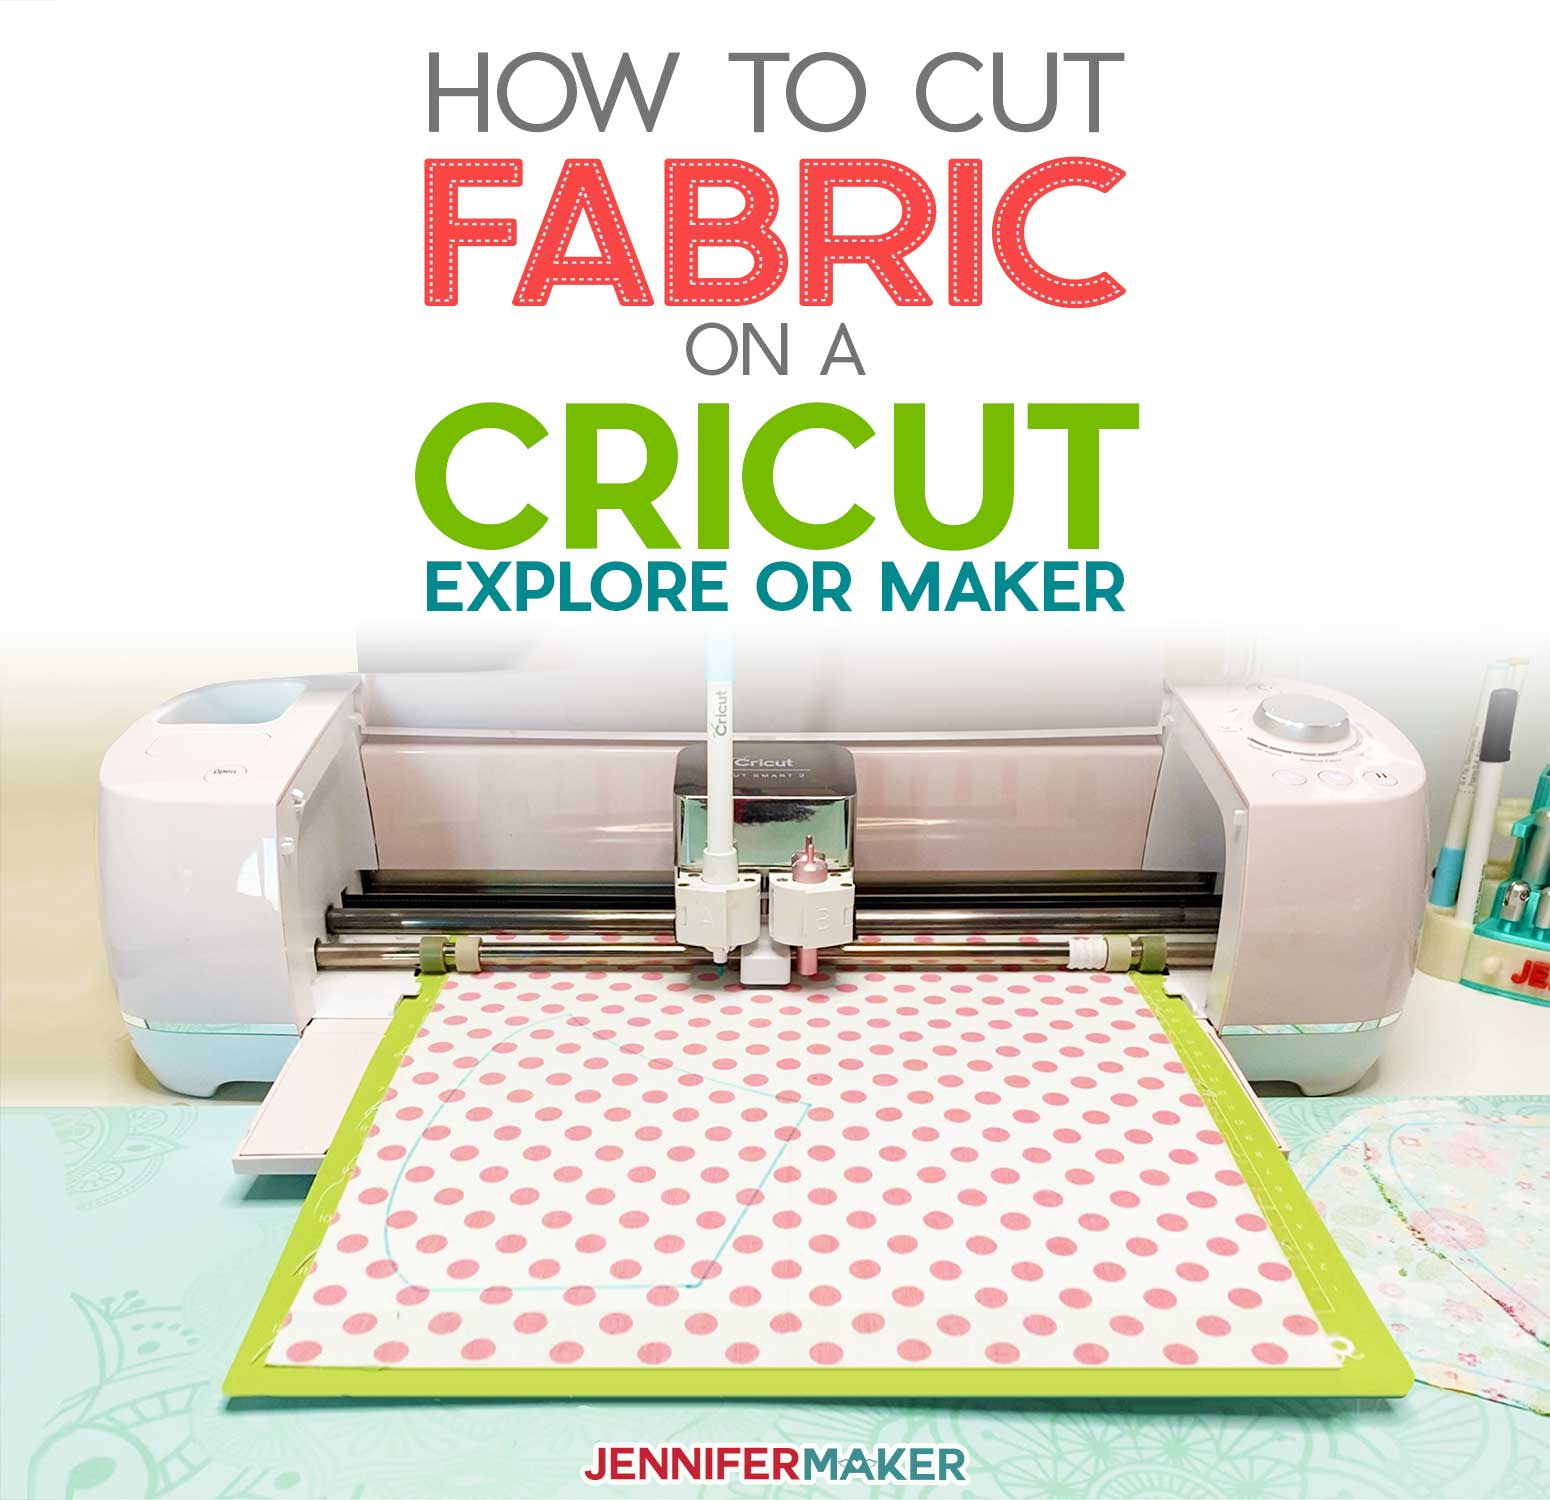 How to Cut Fabric With Cricut Explore or Maker!